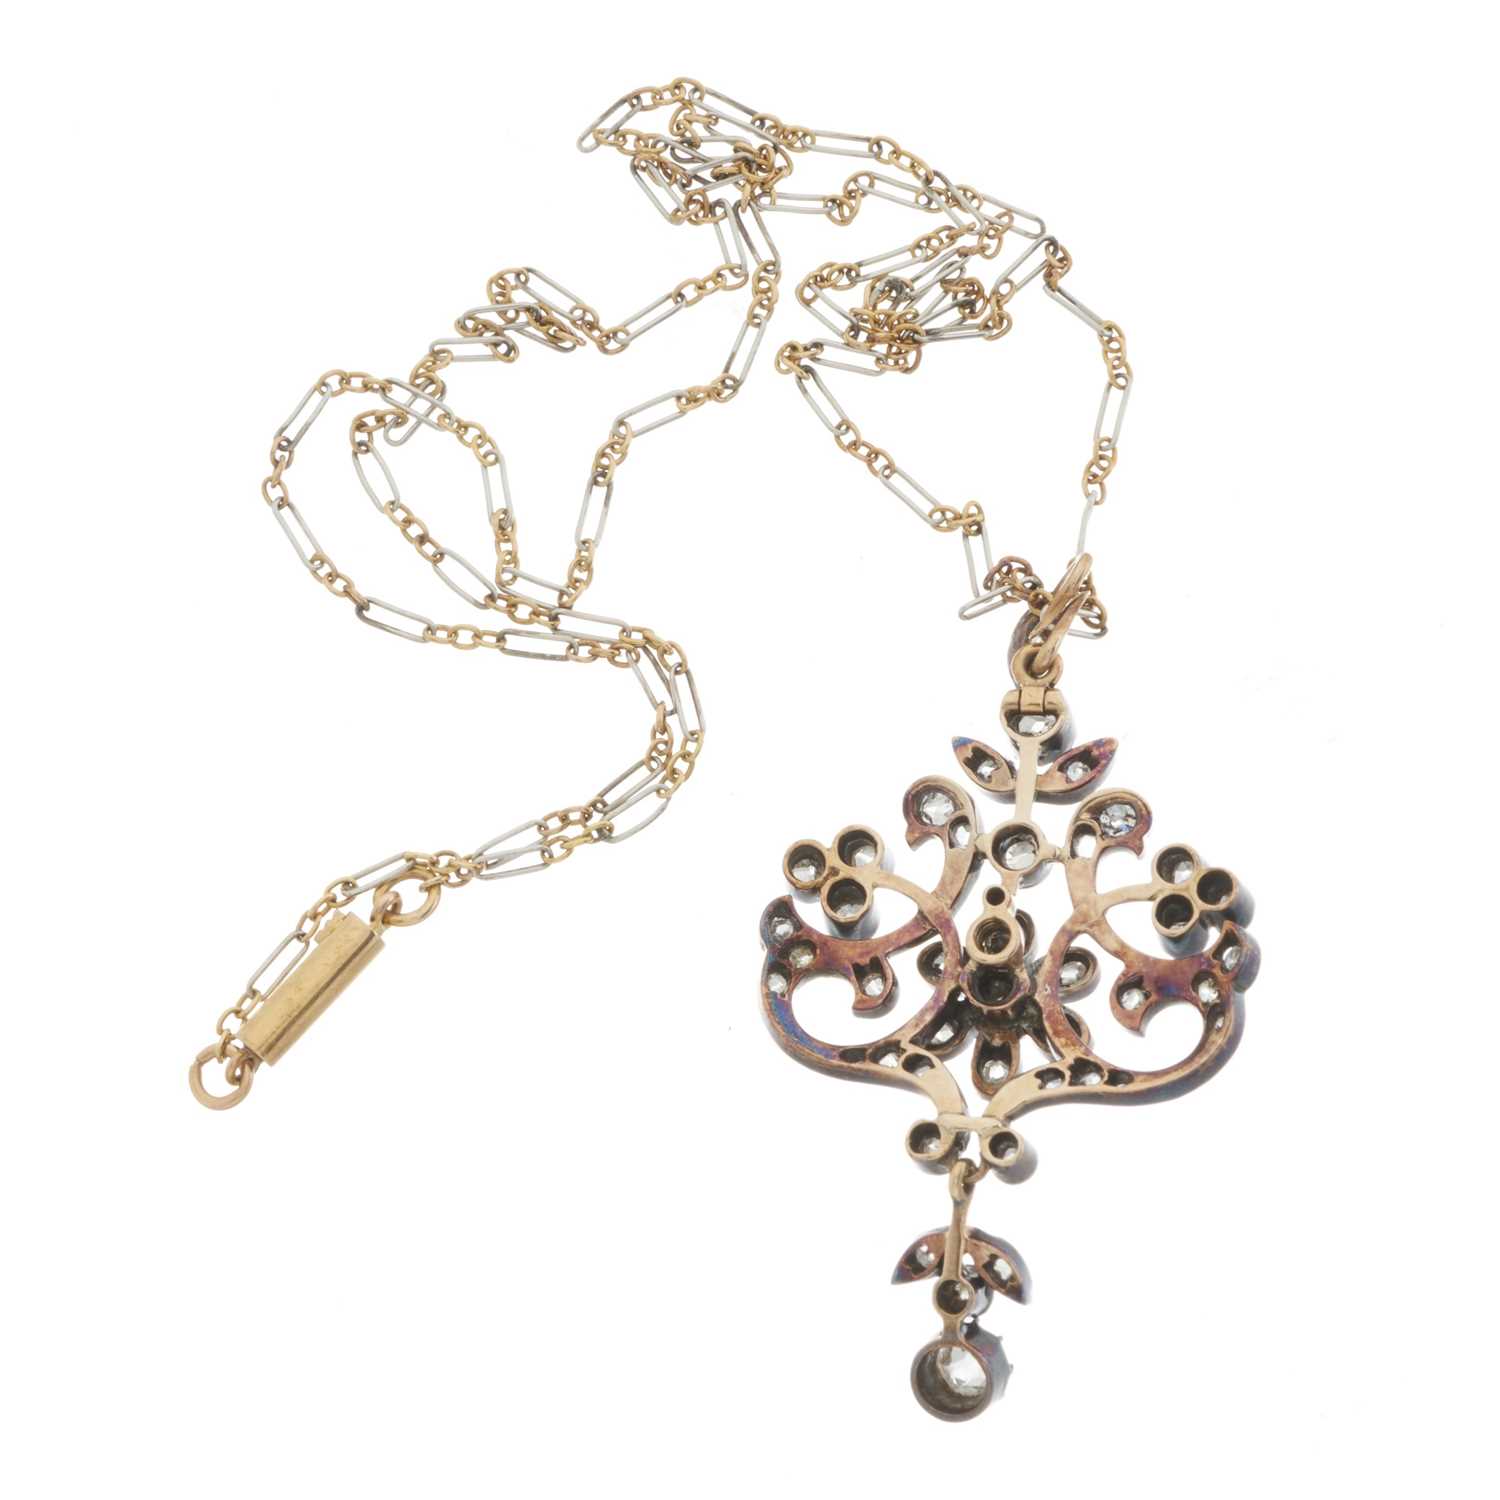 A Belle Epoque silver and gold diamond pendant, with chain - Image 2 of 2